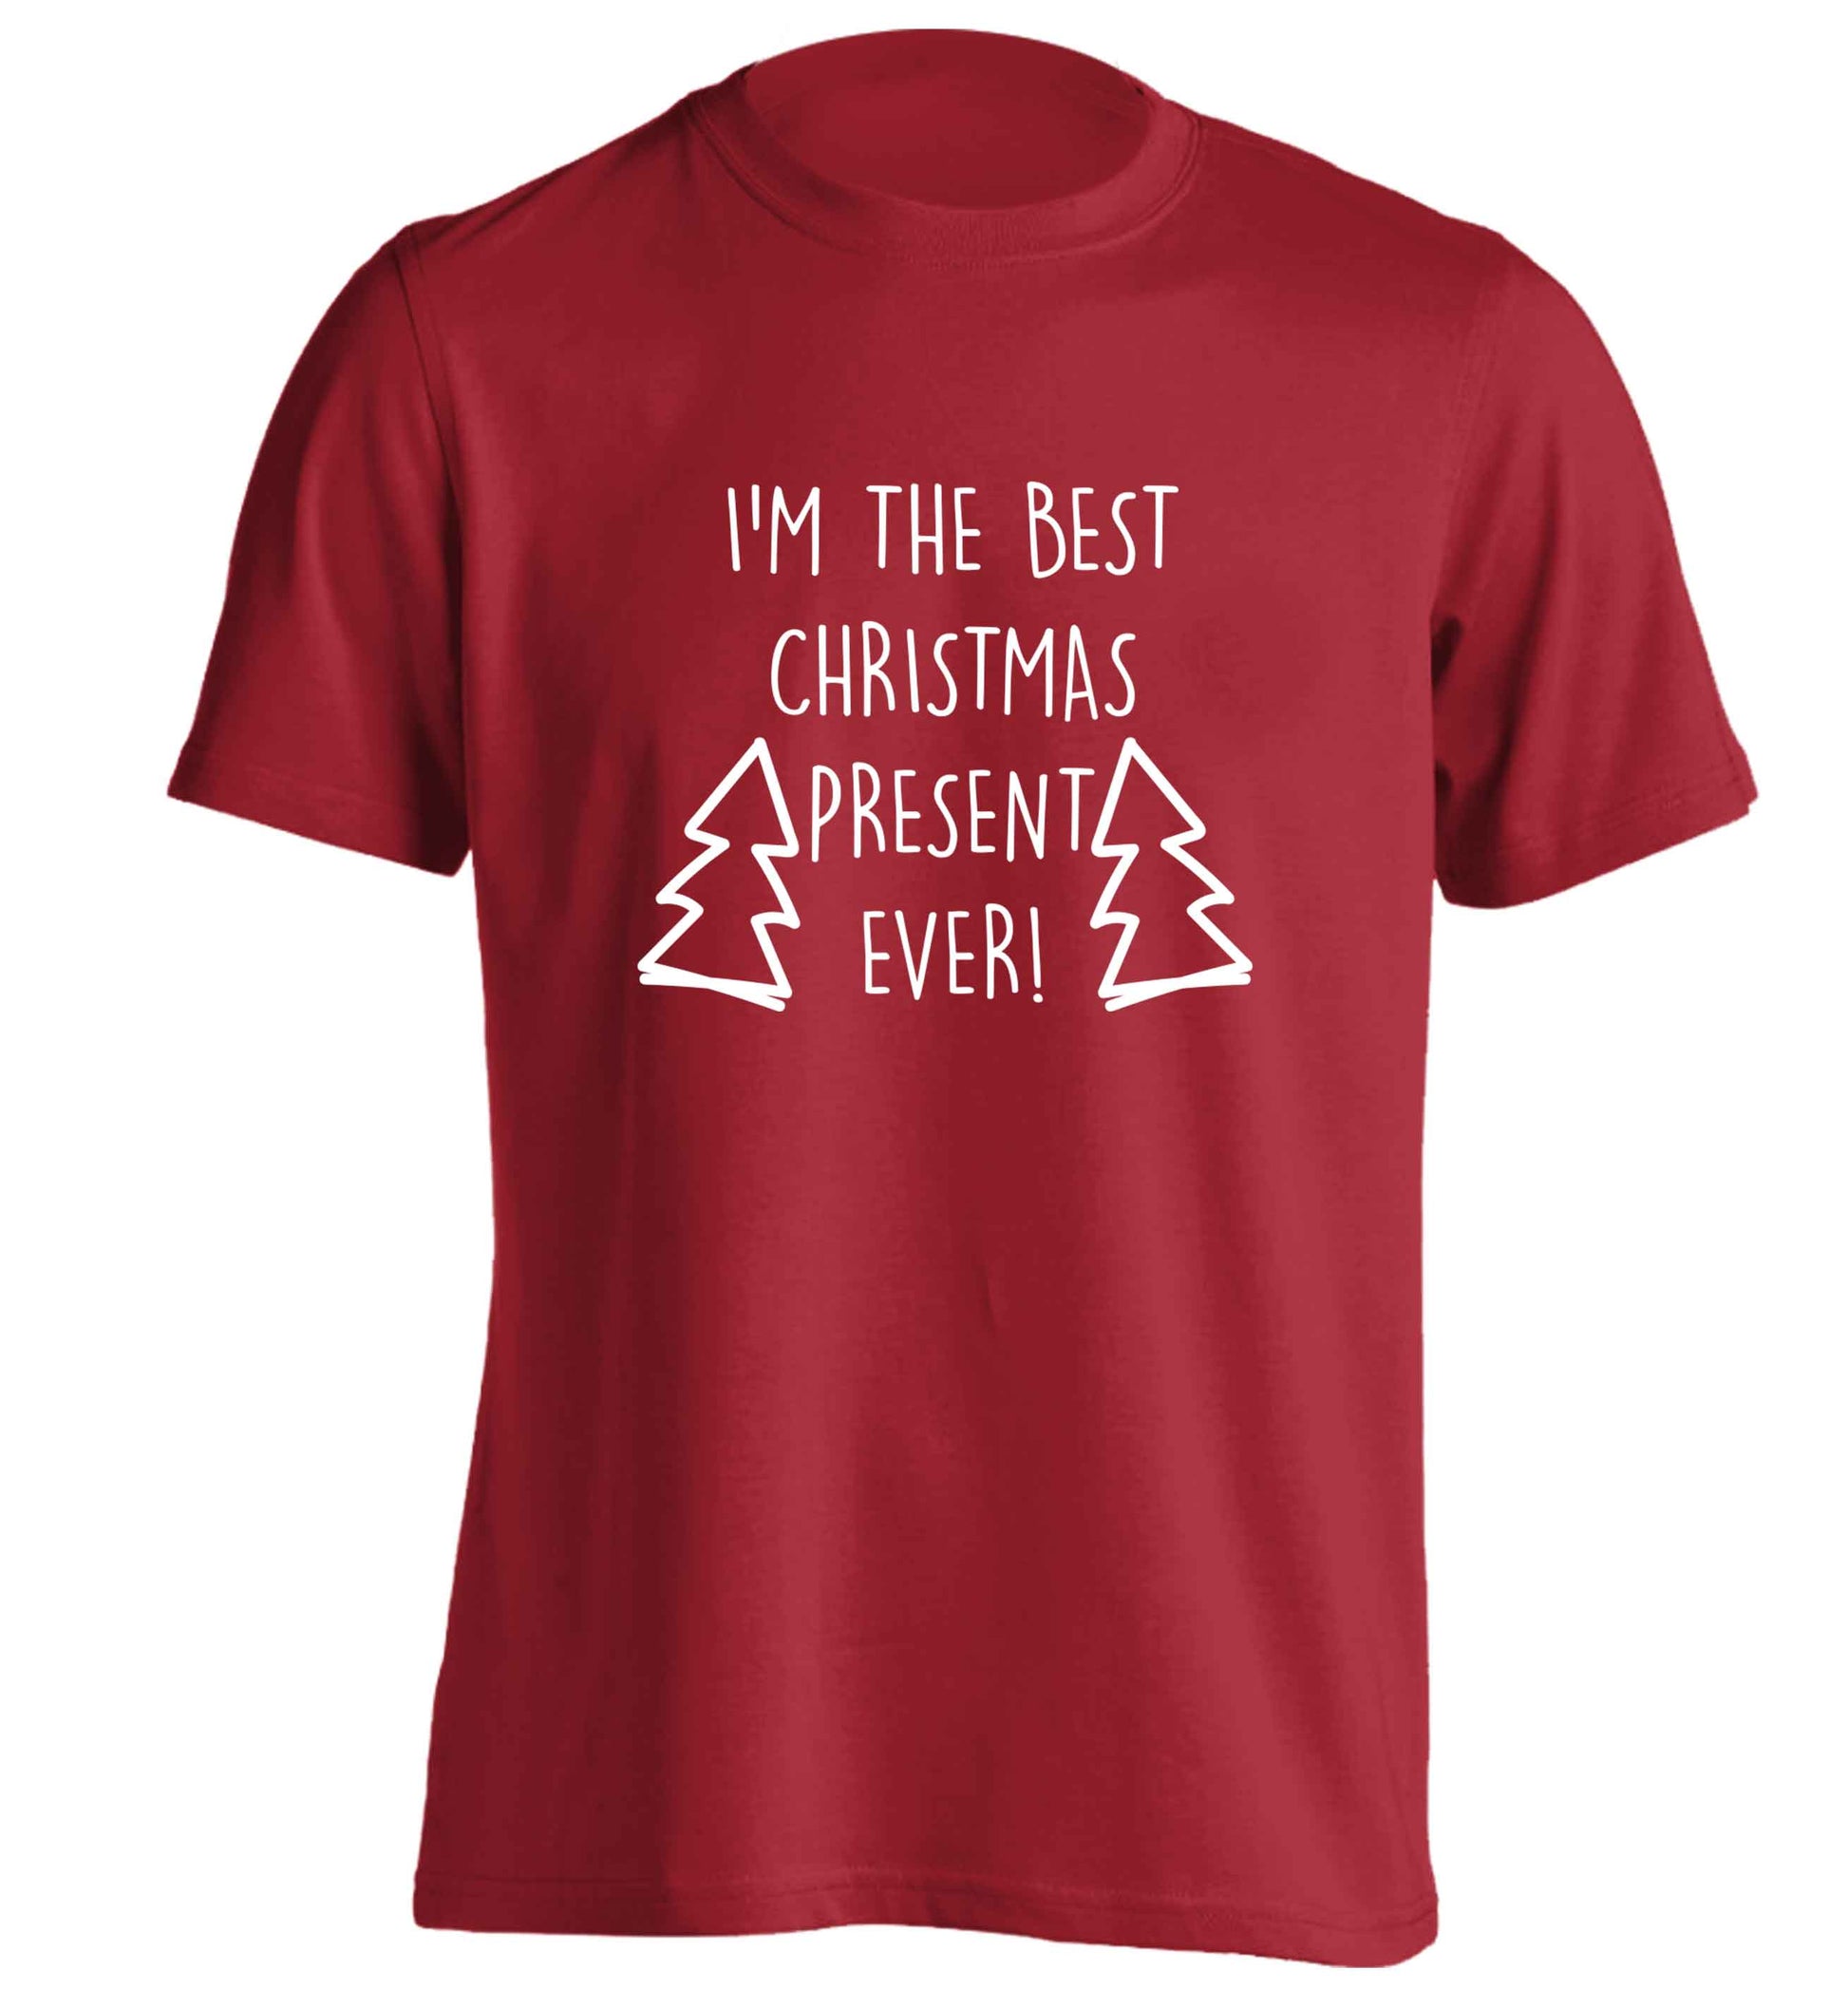 I'm the best Christmas present ever adults unisex red Tshirt 2XL